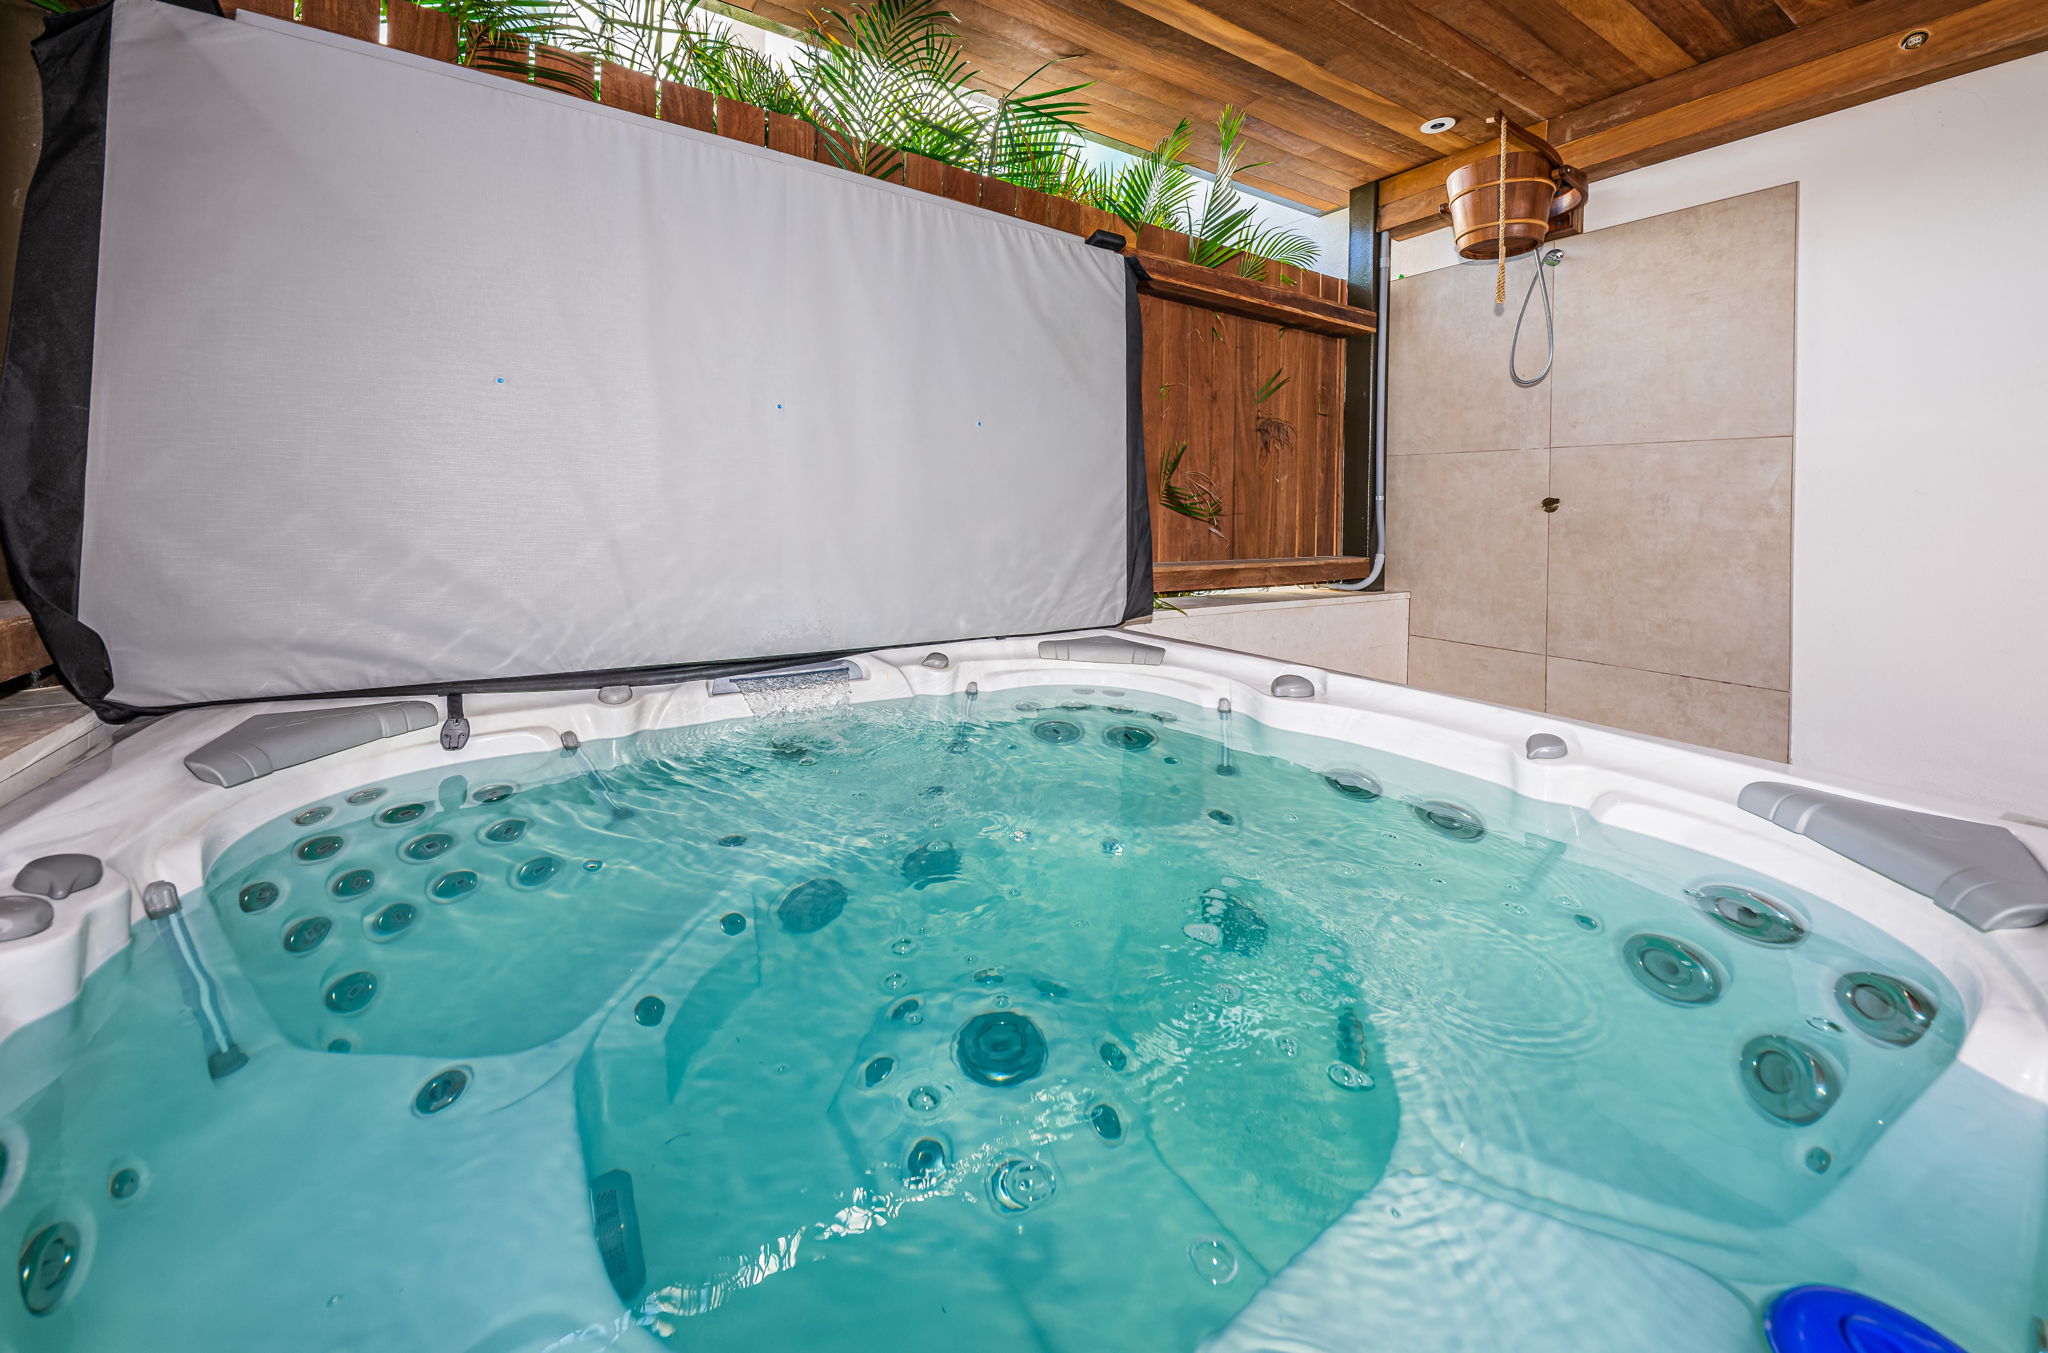 Spa Private Jacuzzi and Shower8